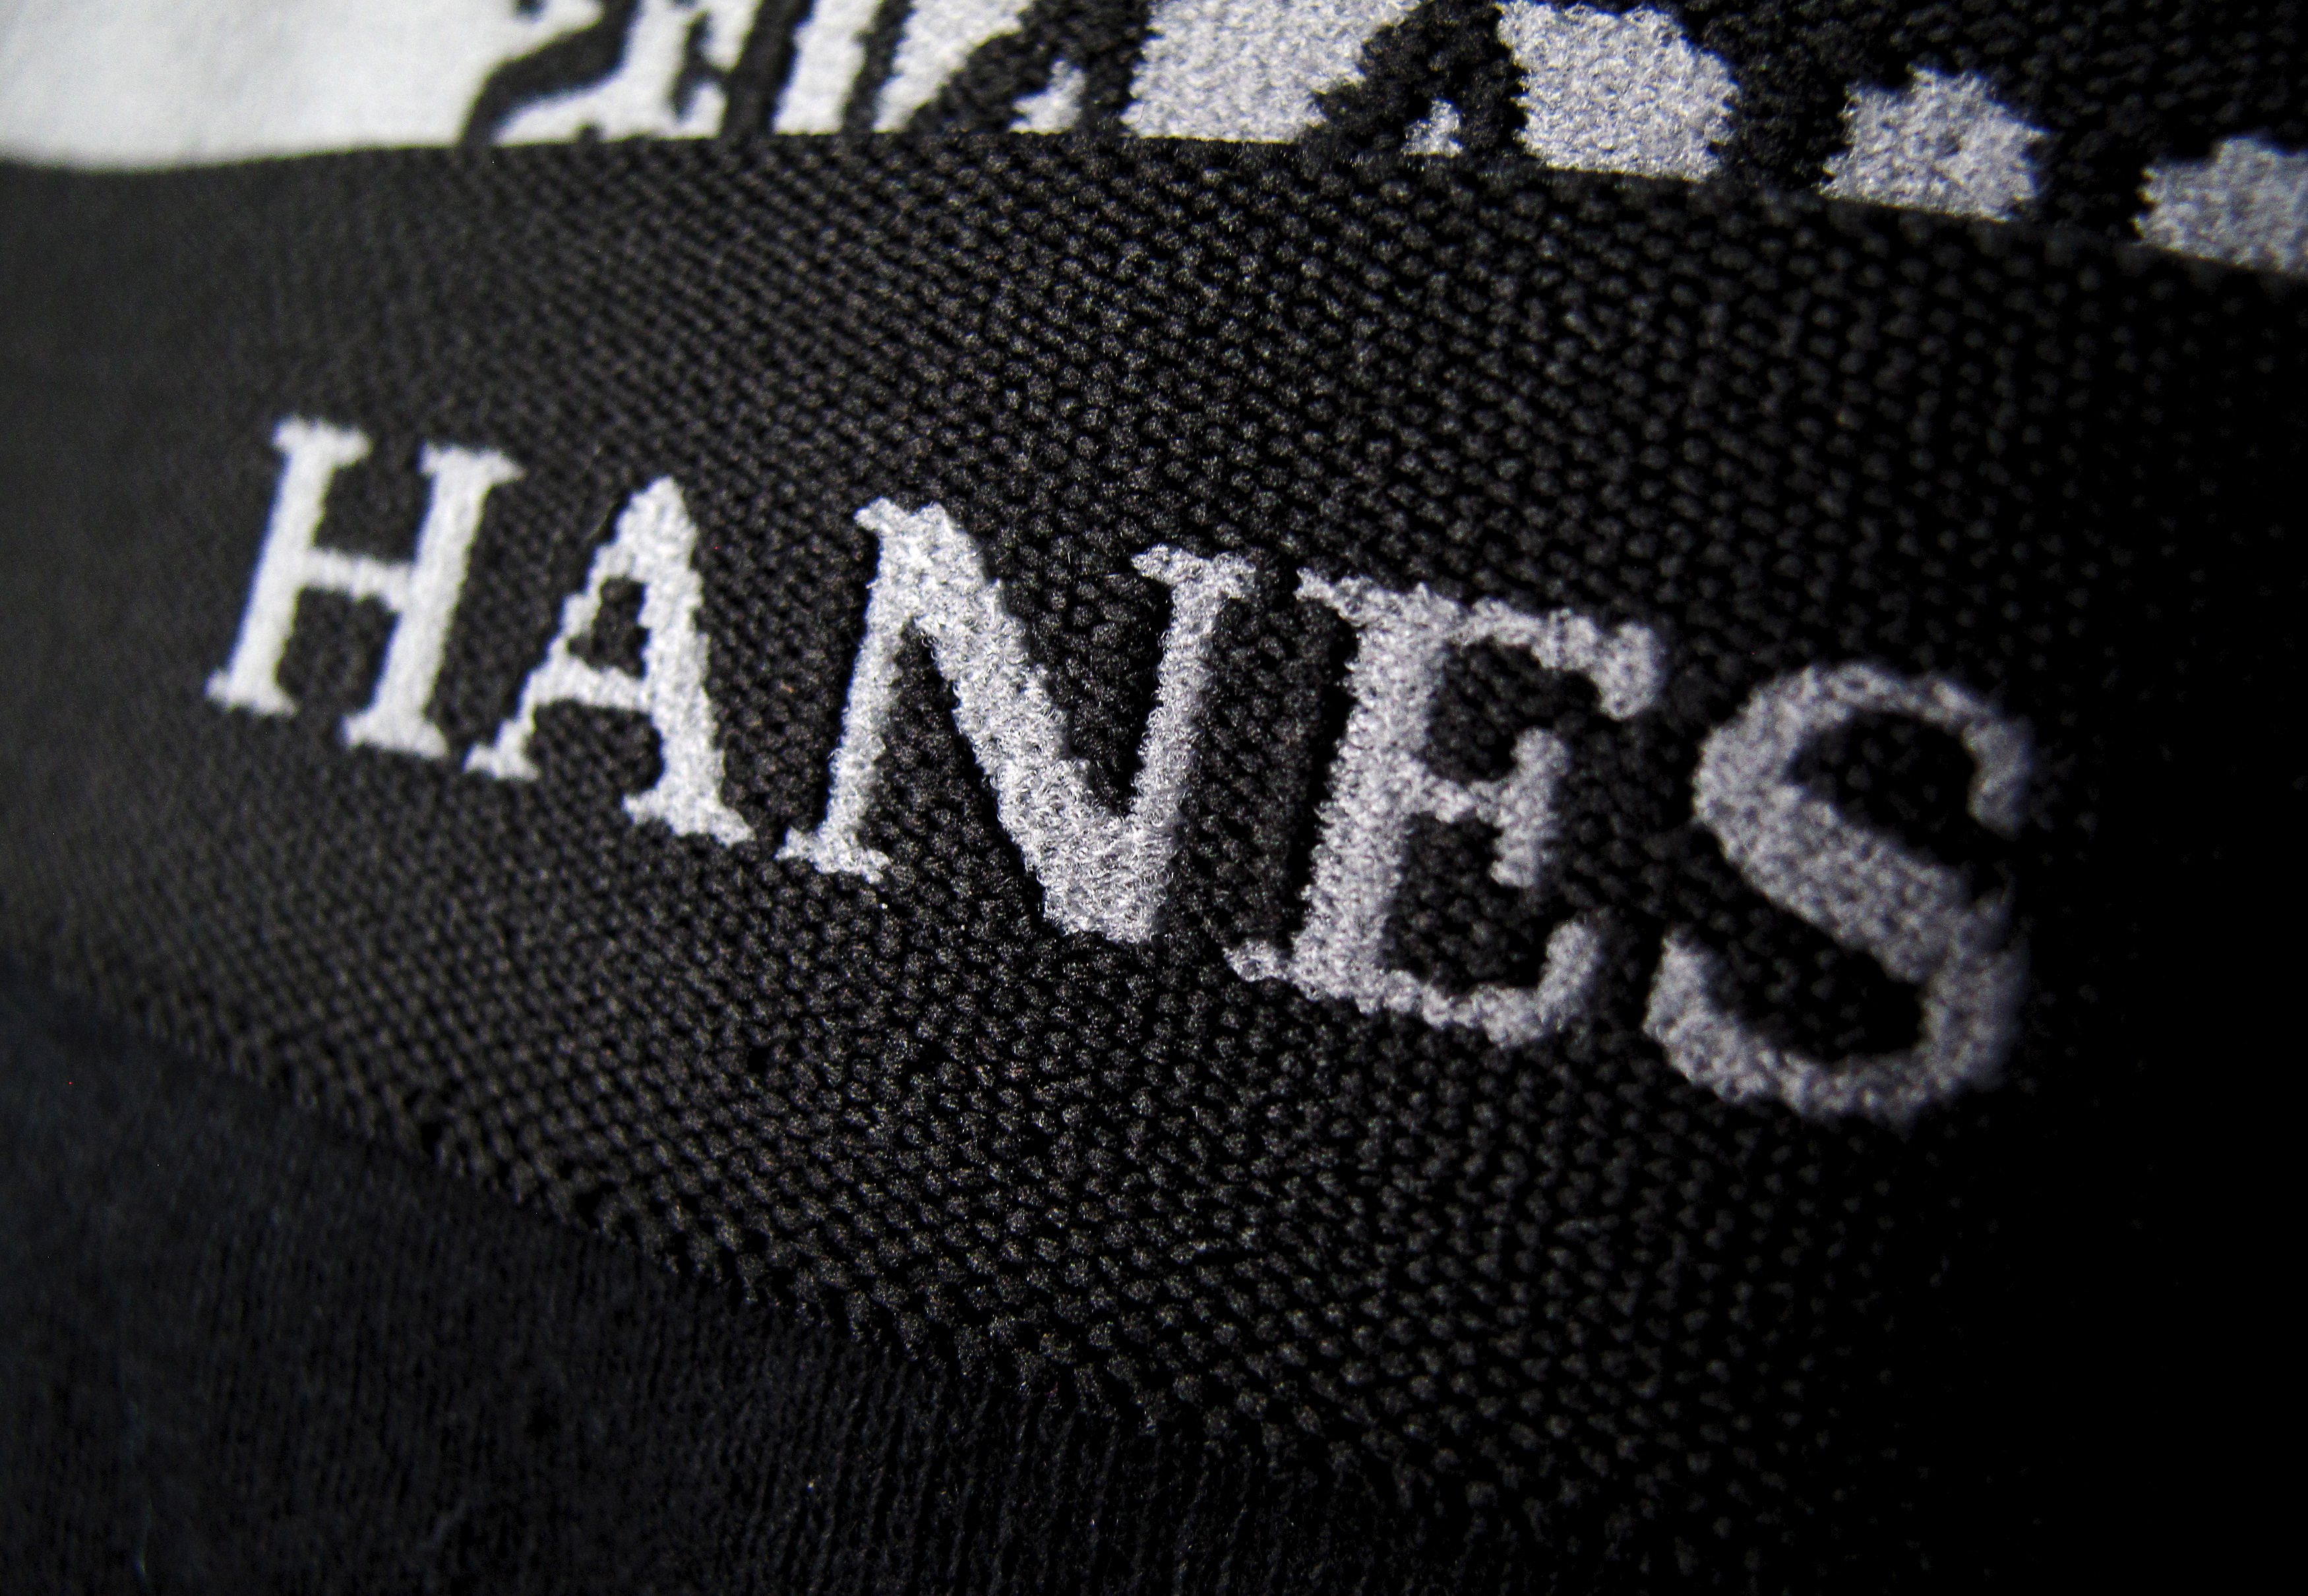 The logo on the waistband of a pair of Hanesbrands Inc underwear is pictured in Encinitas